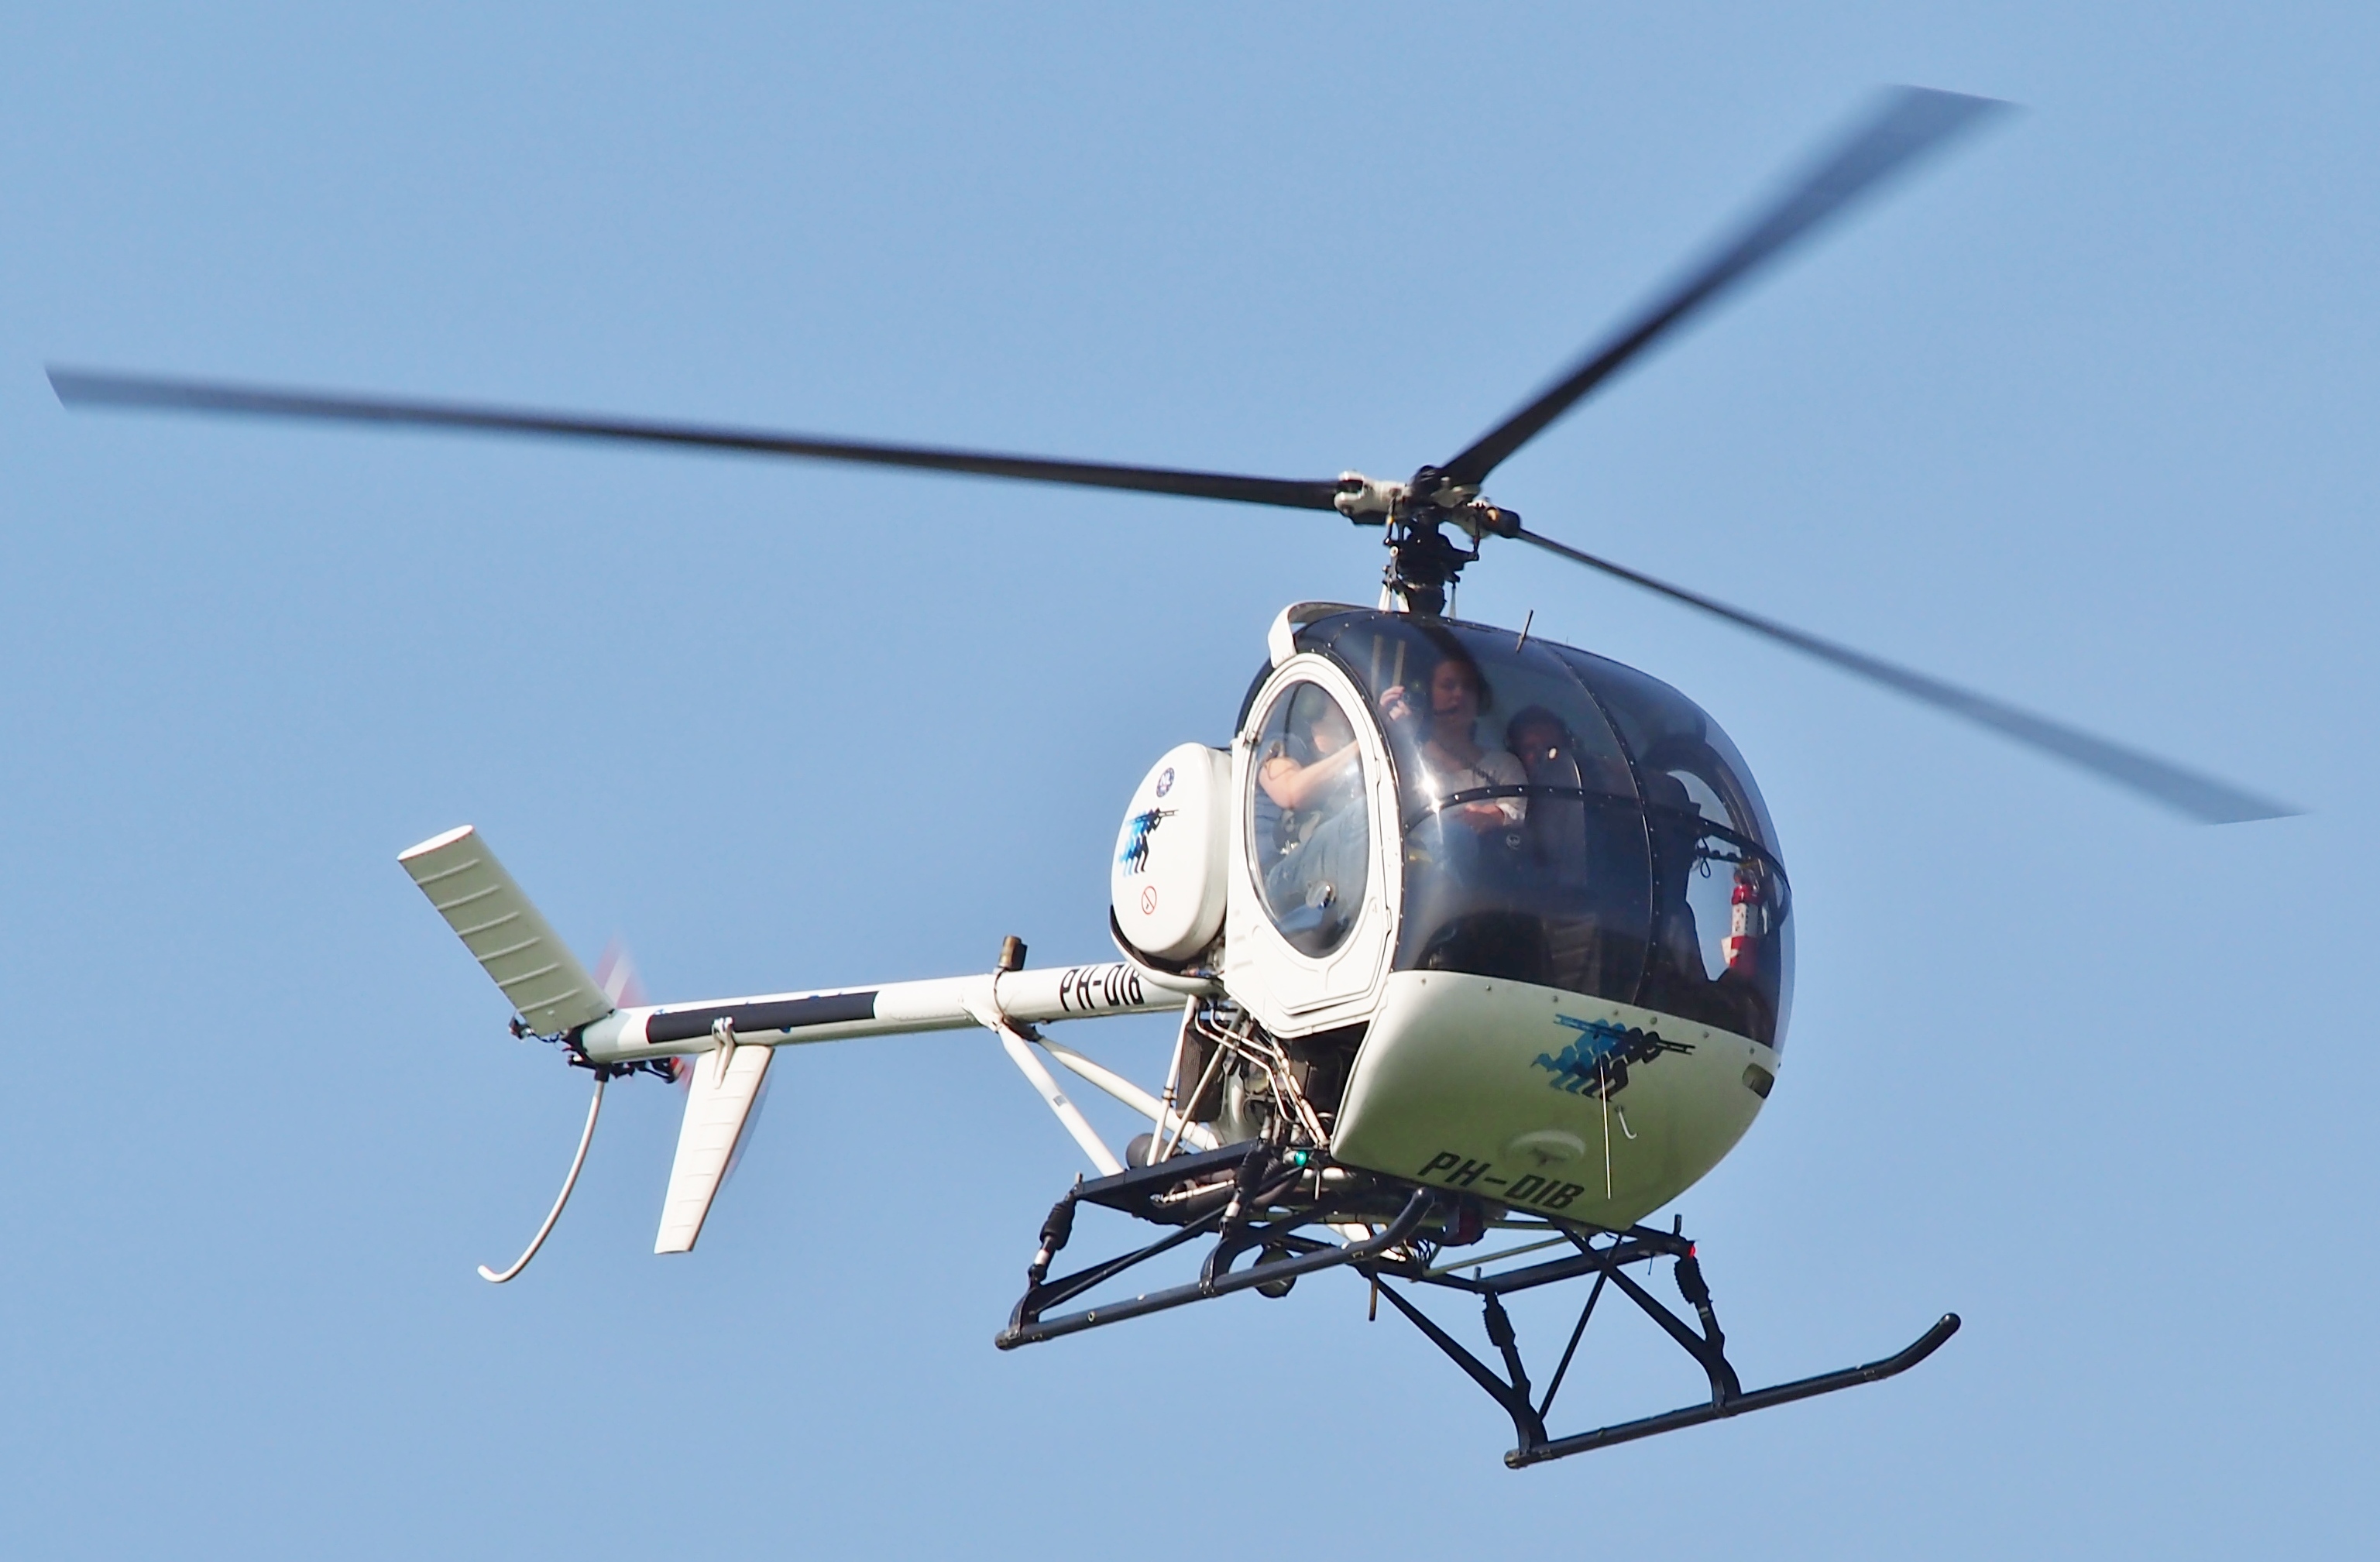 hughes 300 rc helicopter